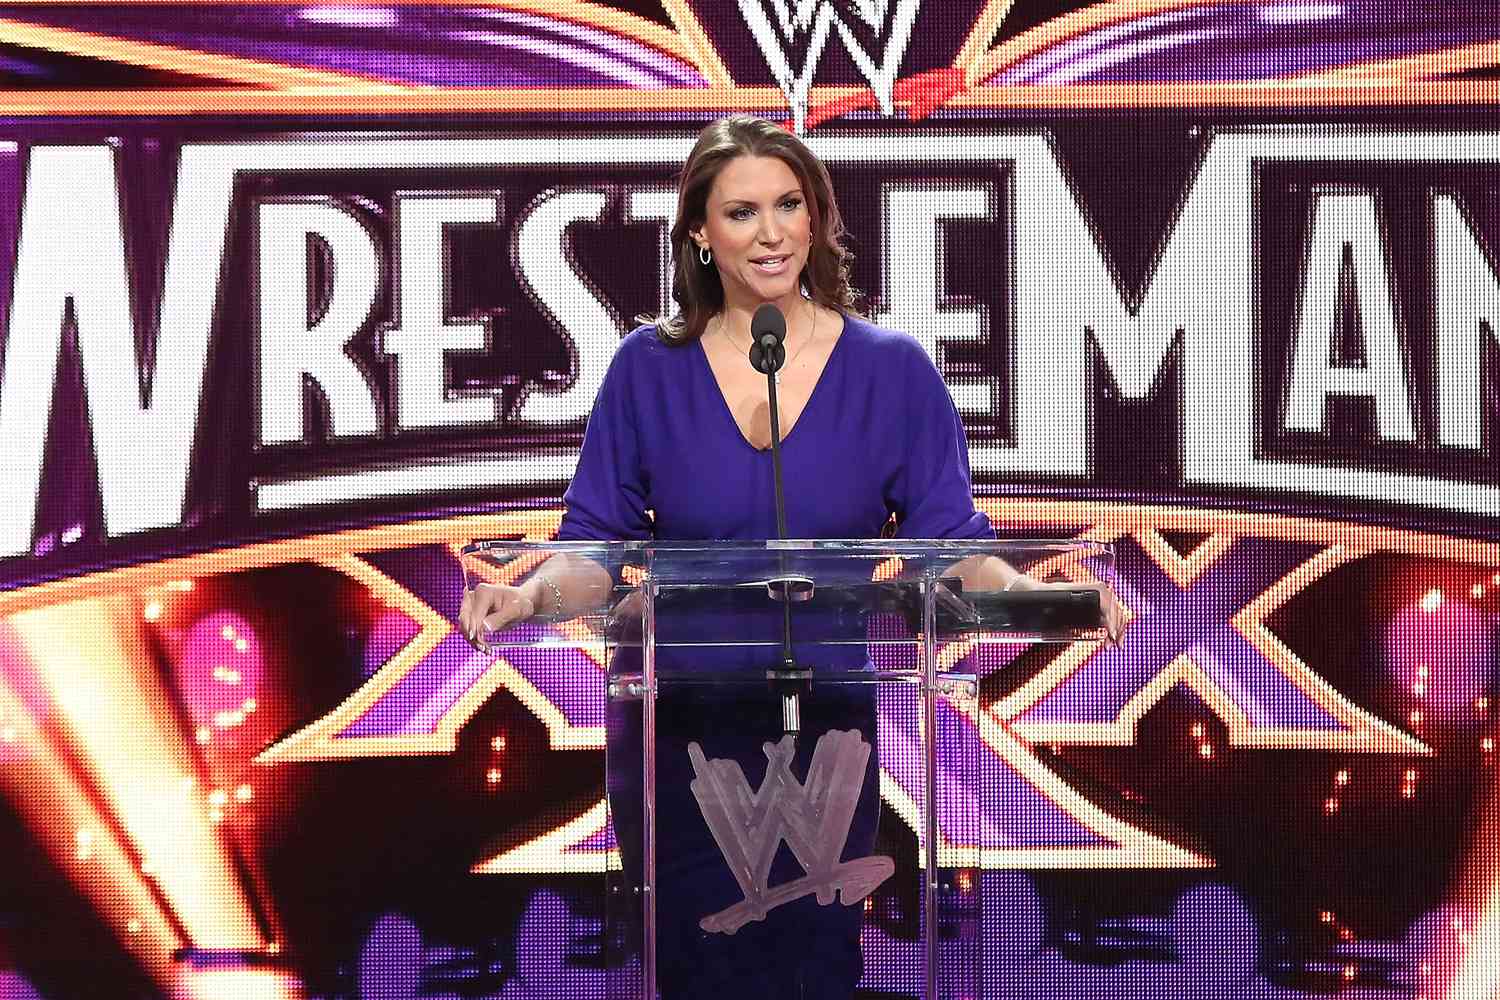 Stephanie McMahon Reveals She’s Taking Leave of Absence from WWE to ‘Focus on My Family’